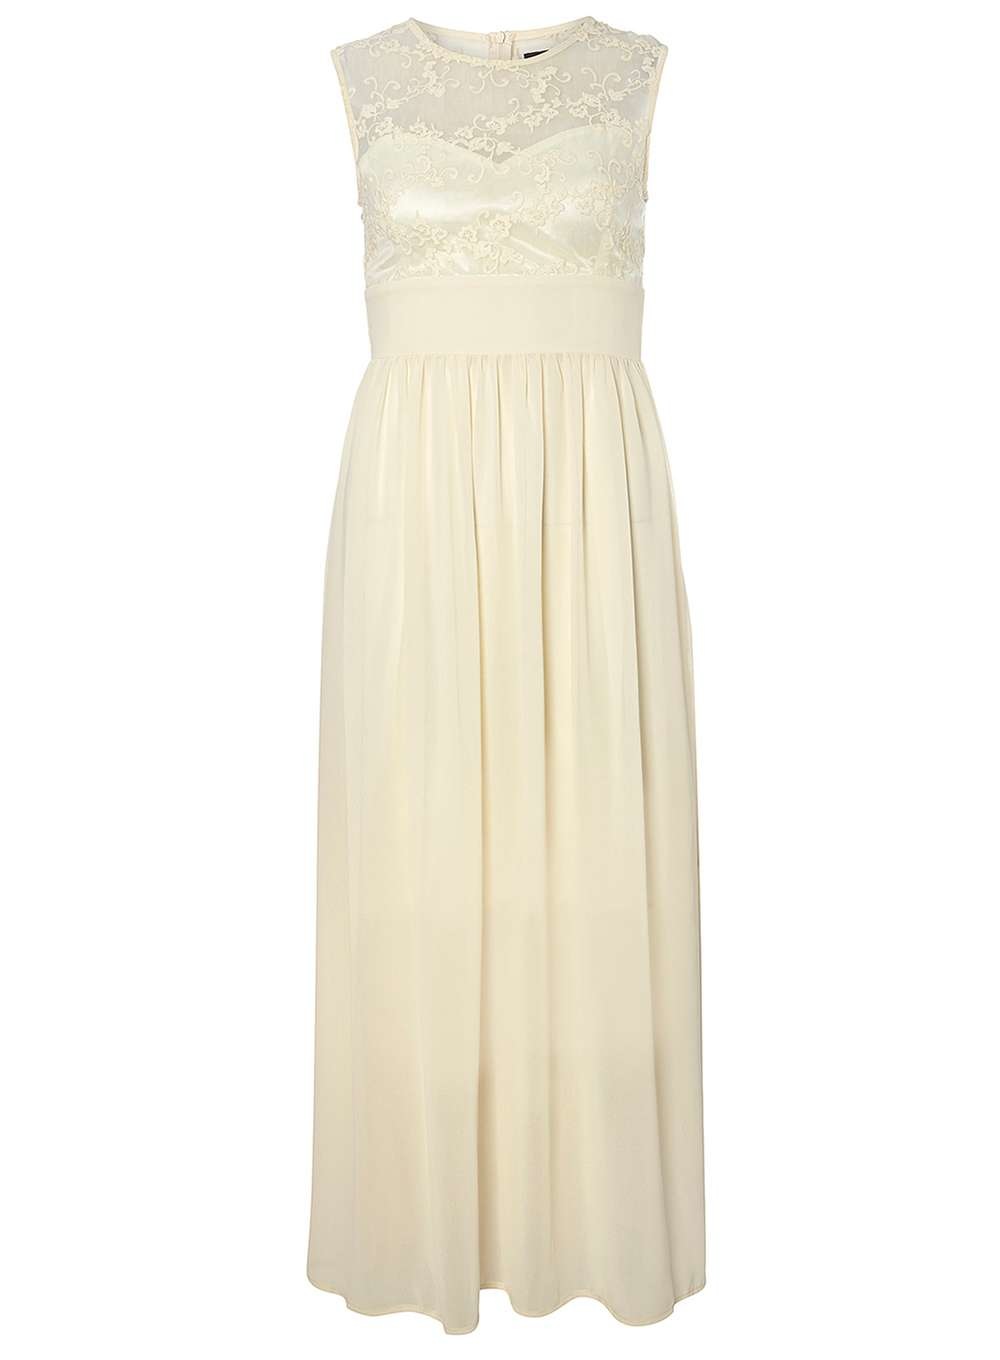 Gorgeous and Affordable Off the Rack Maxi Wedding Dresses - SaveOnTheDate